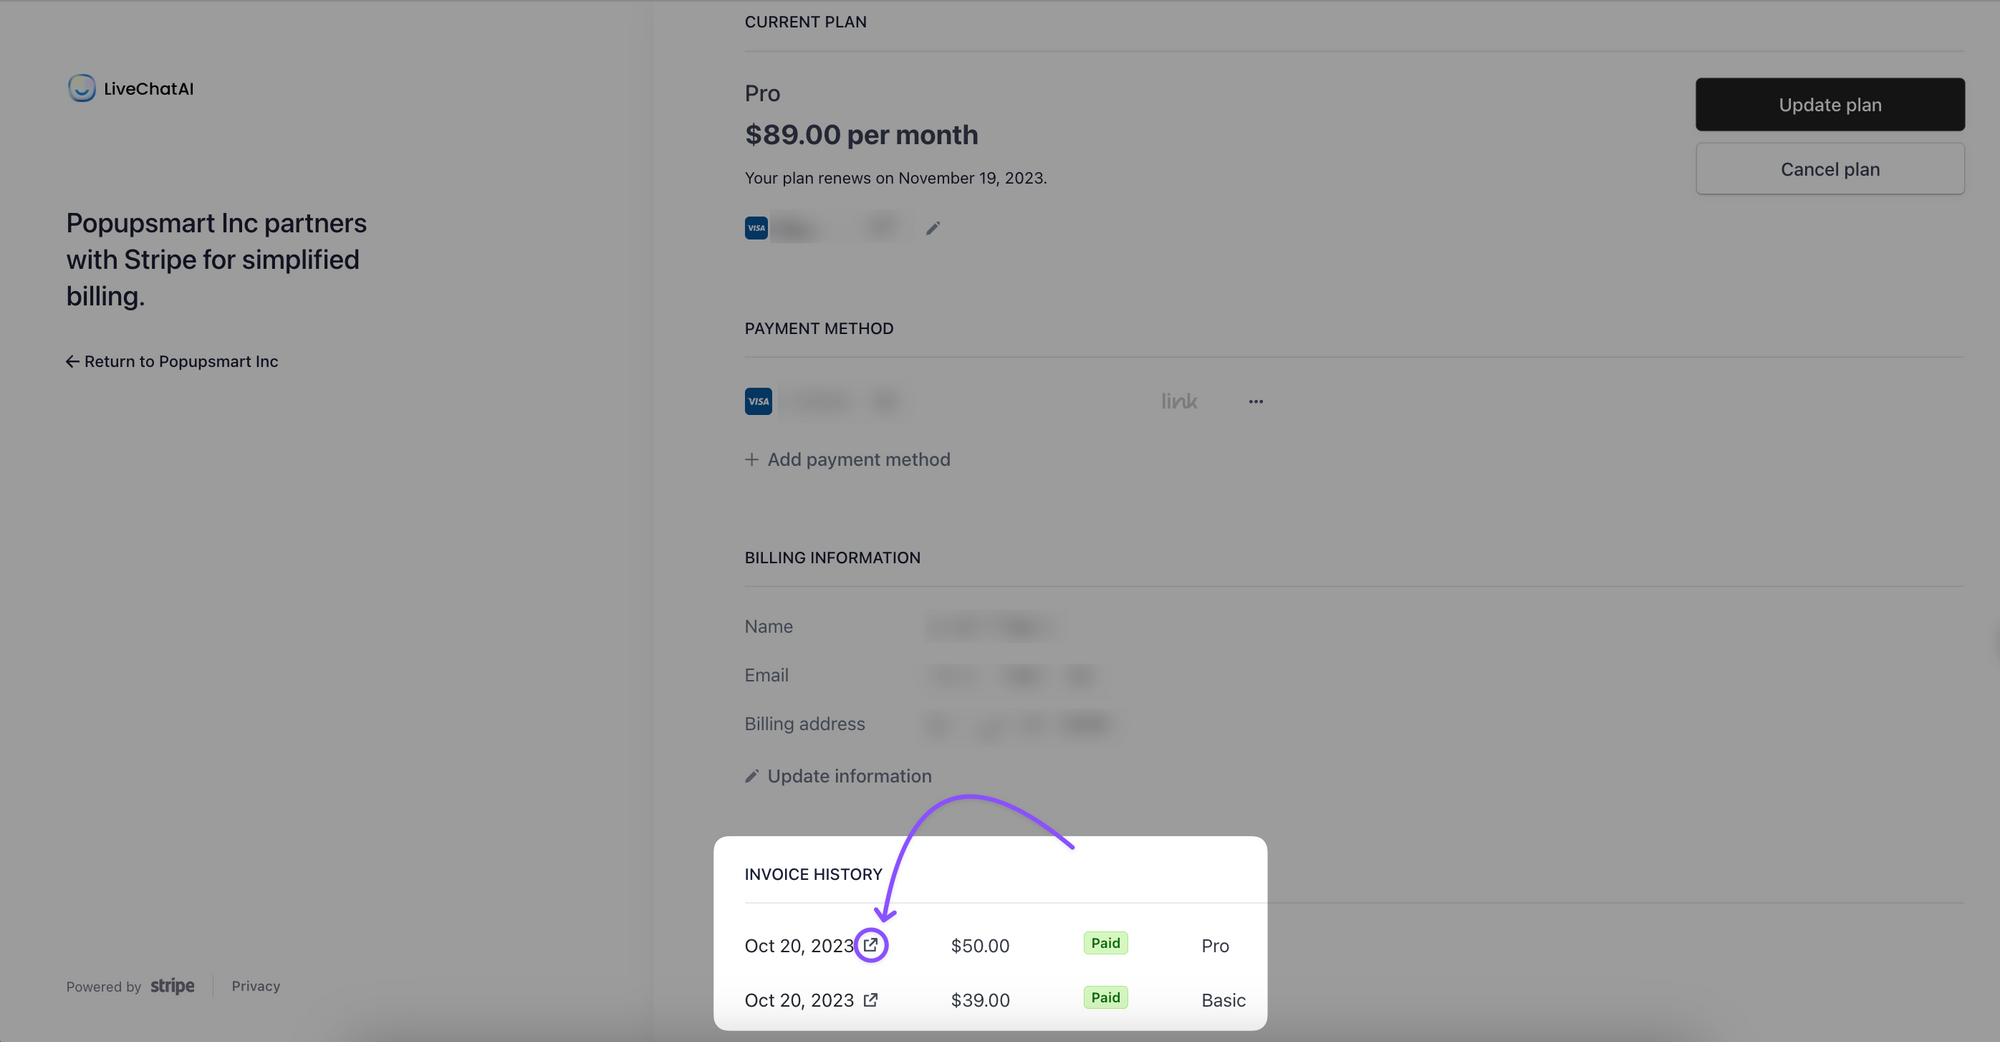 clciking on the download button to get the invoice of purchases of a LiveChatAI account